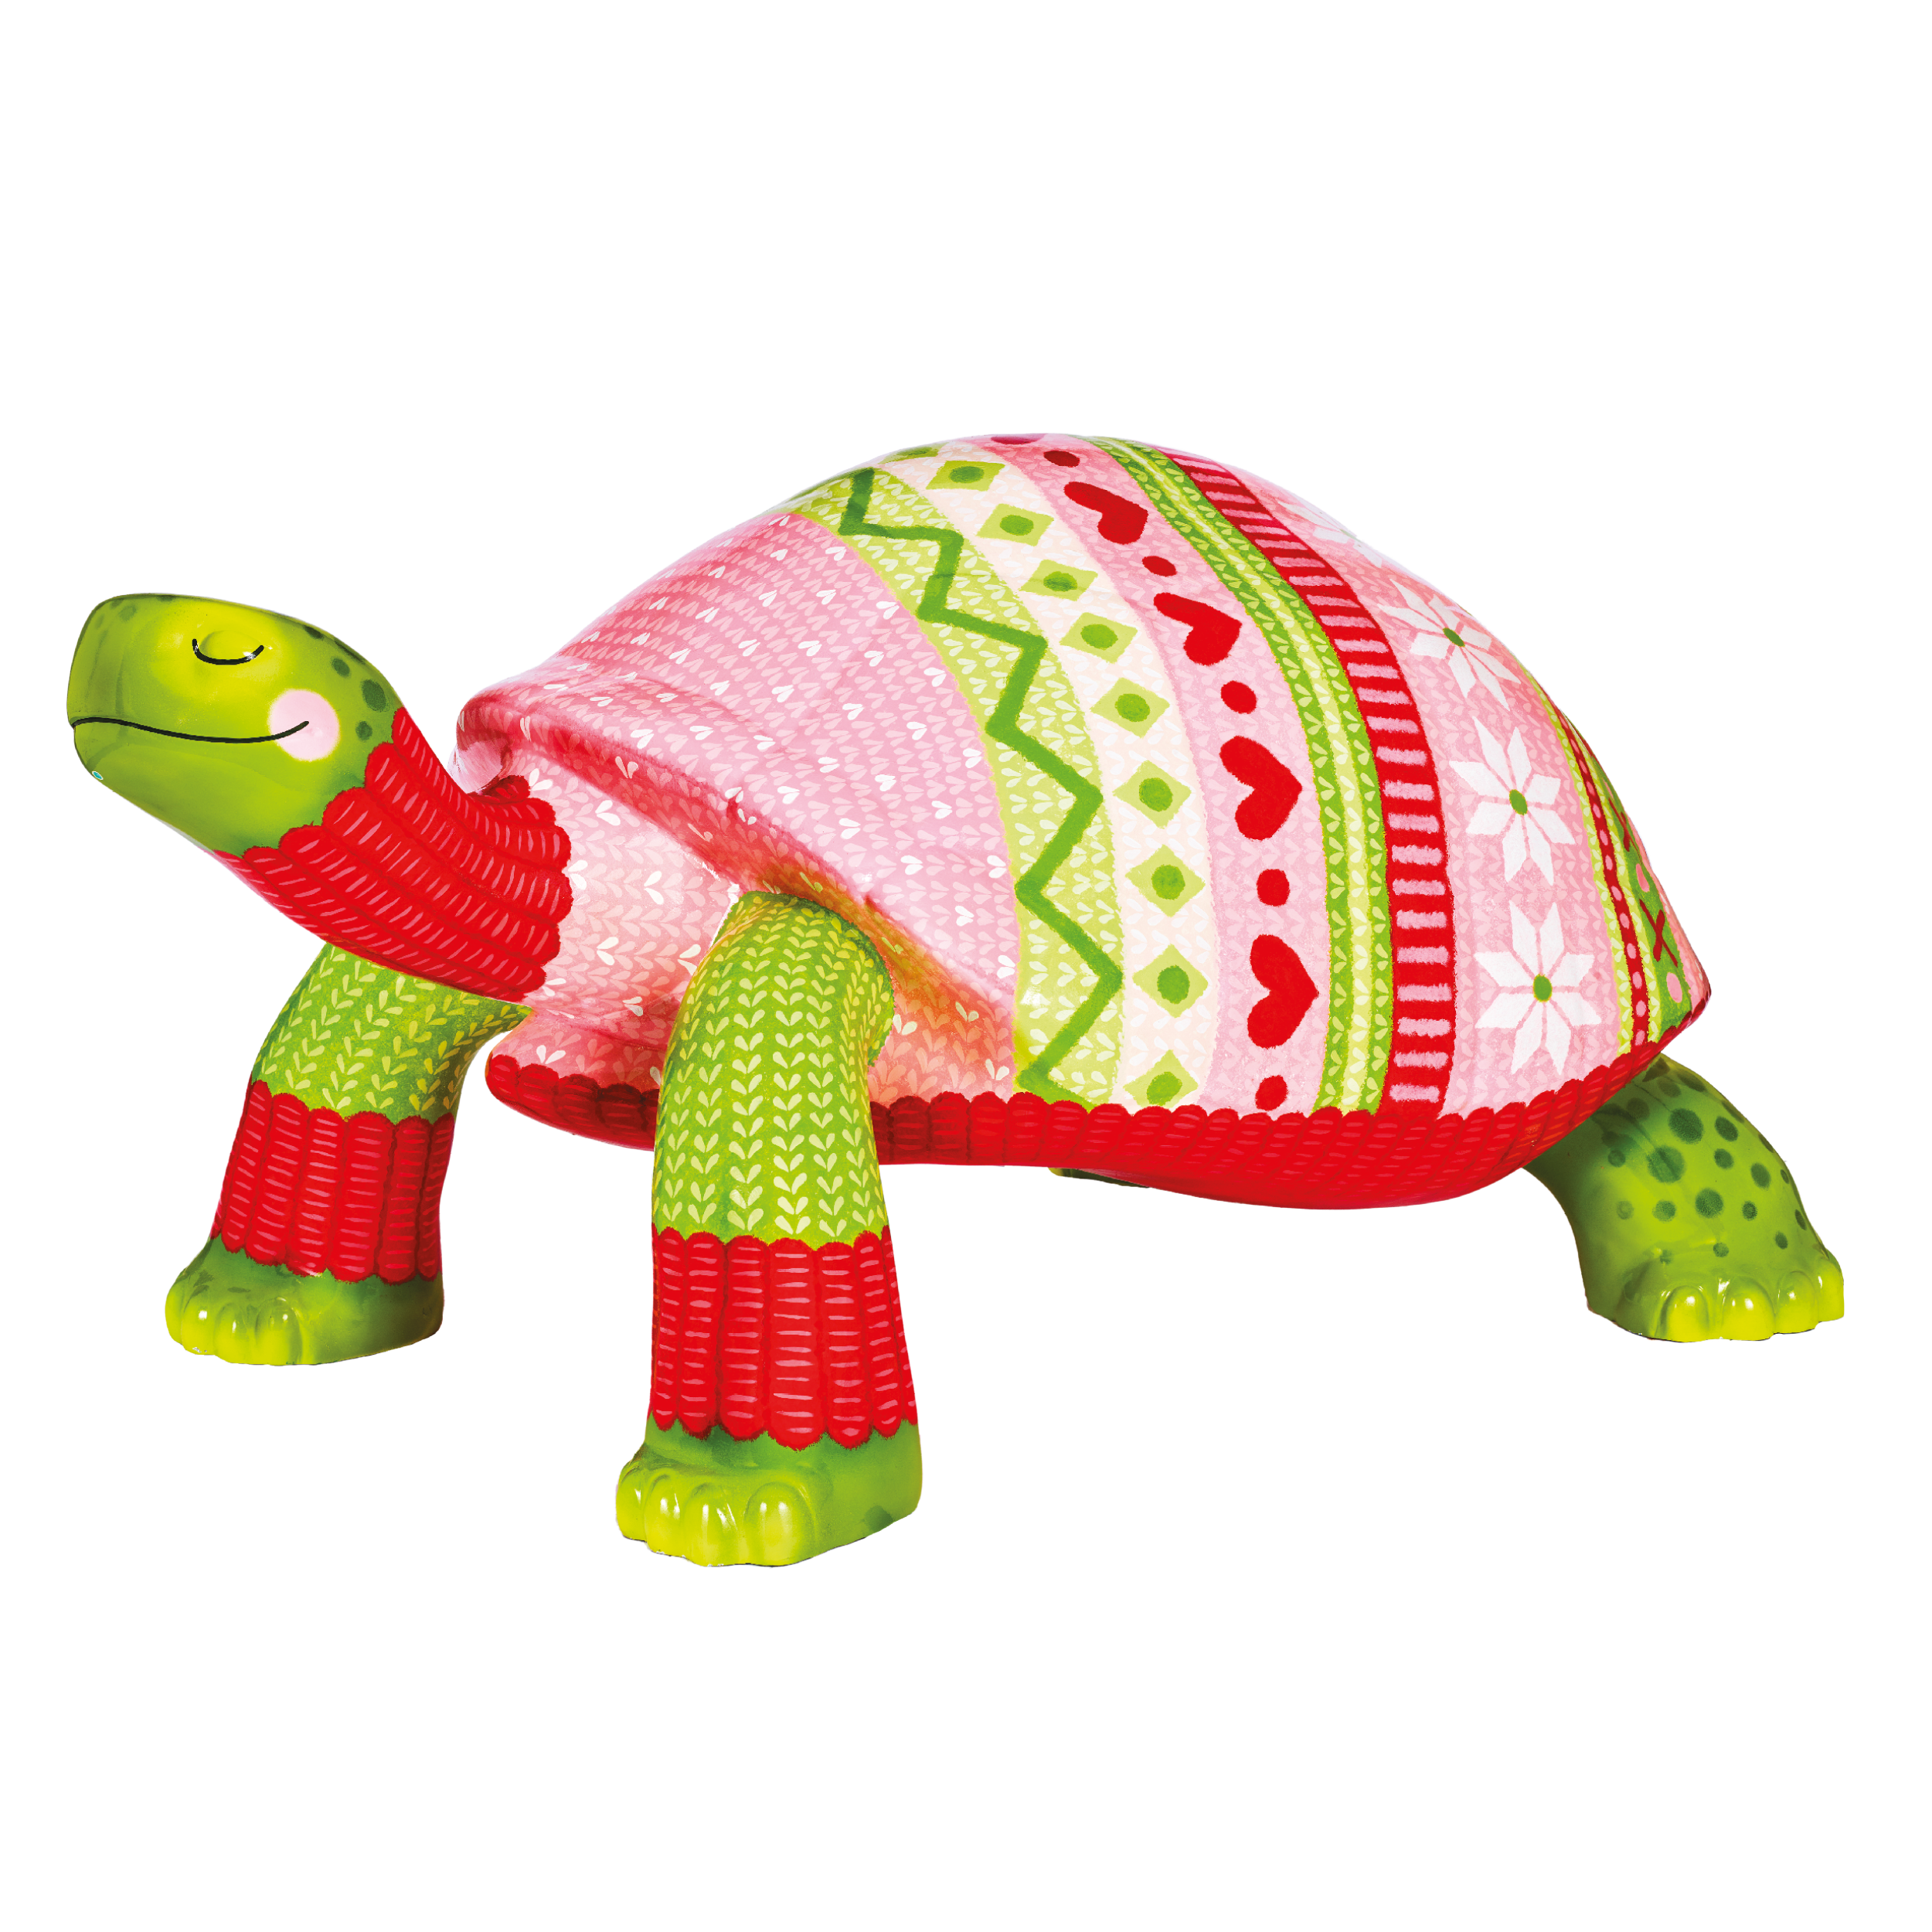 tt_large_2500x2500_Terry_the_Turtleneck_Tortoise.png